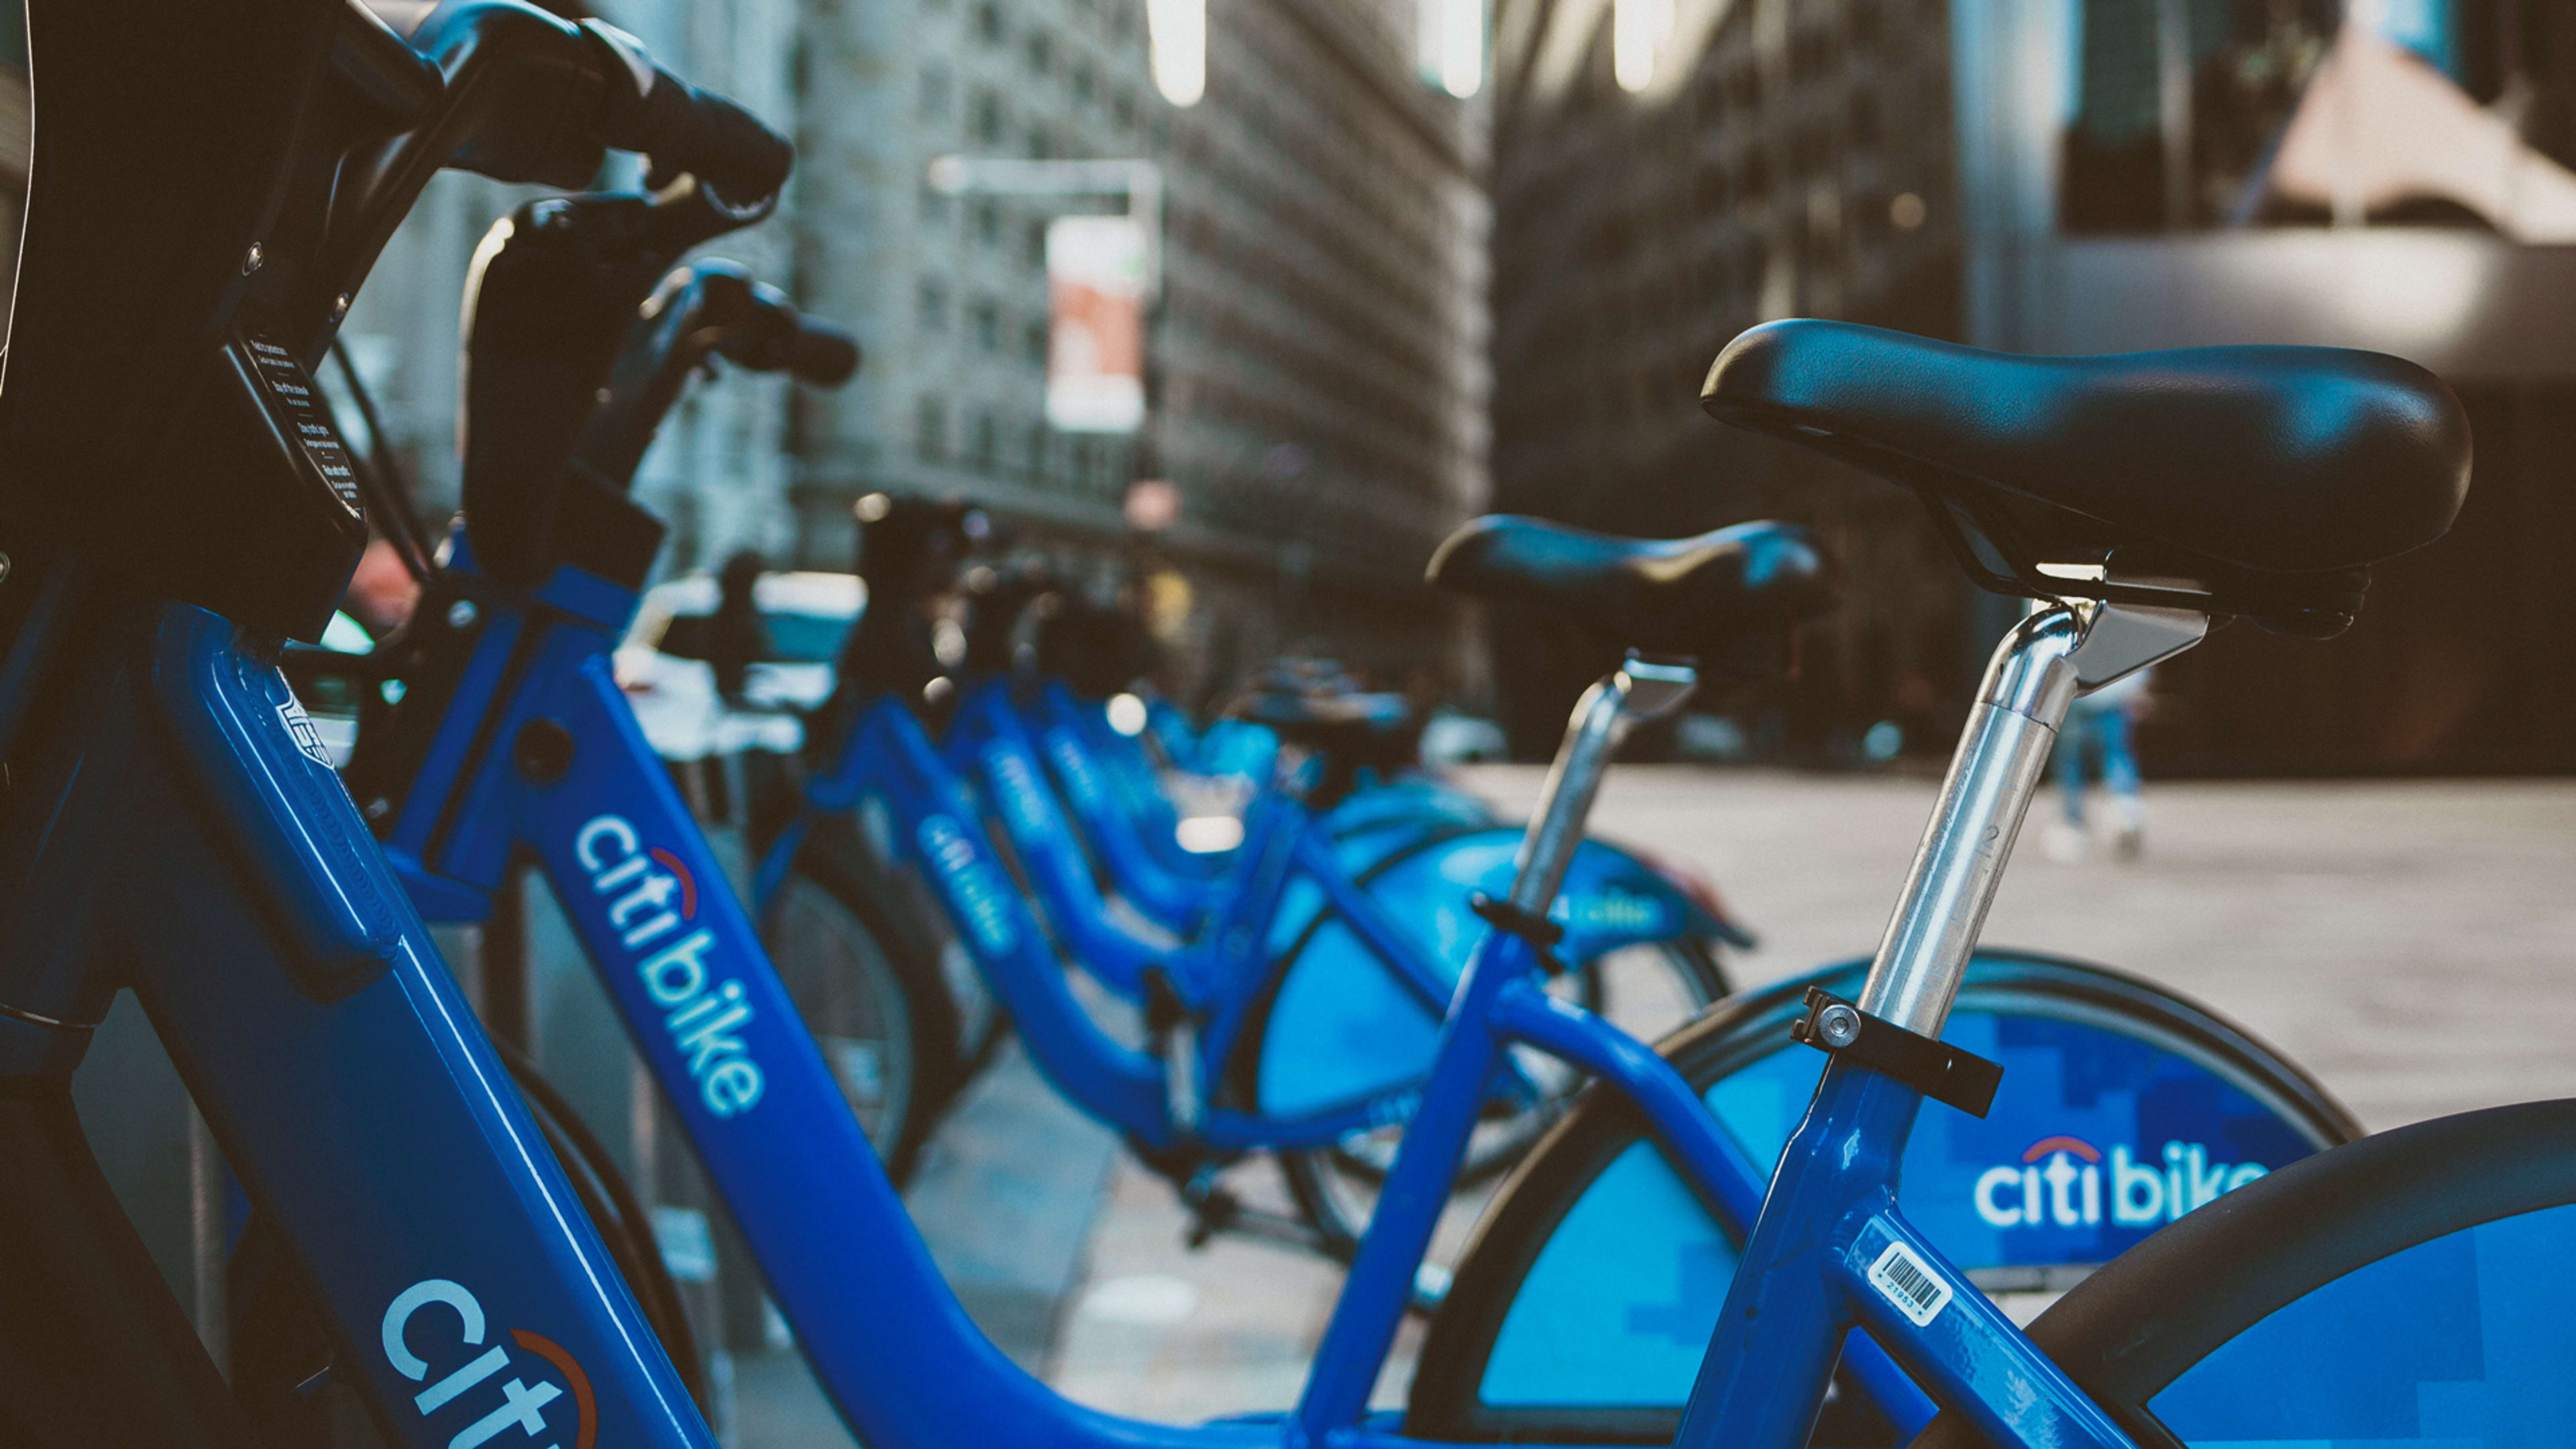 Lyft puts the brakes on some of its Citi Bikes due to brake issues